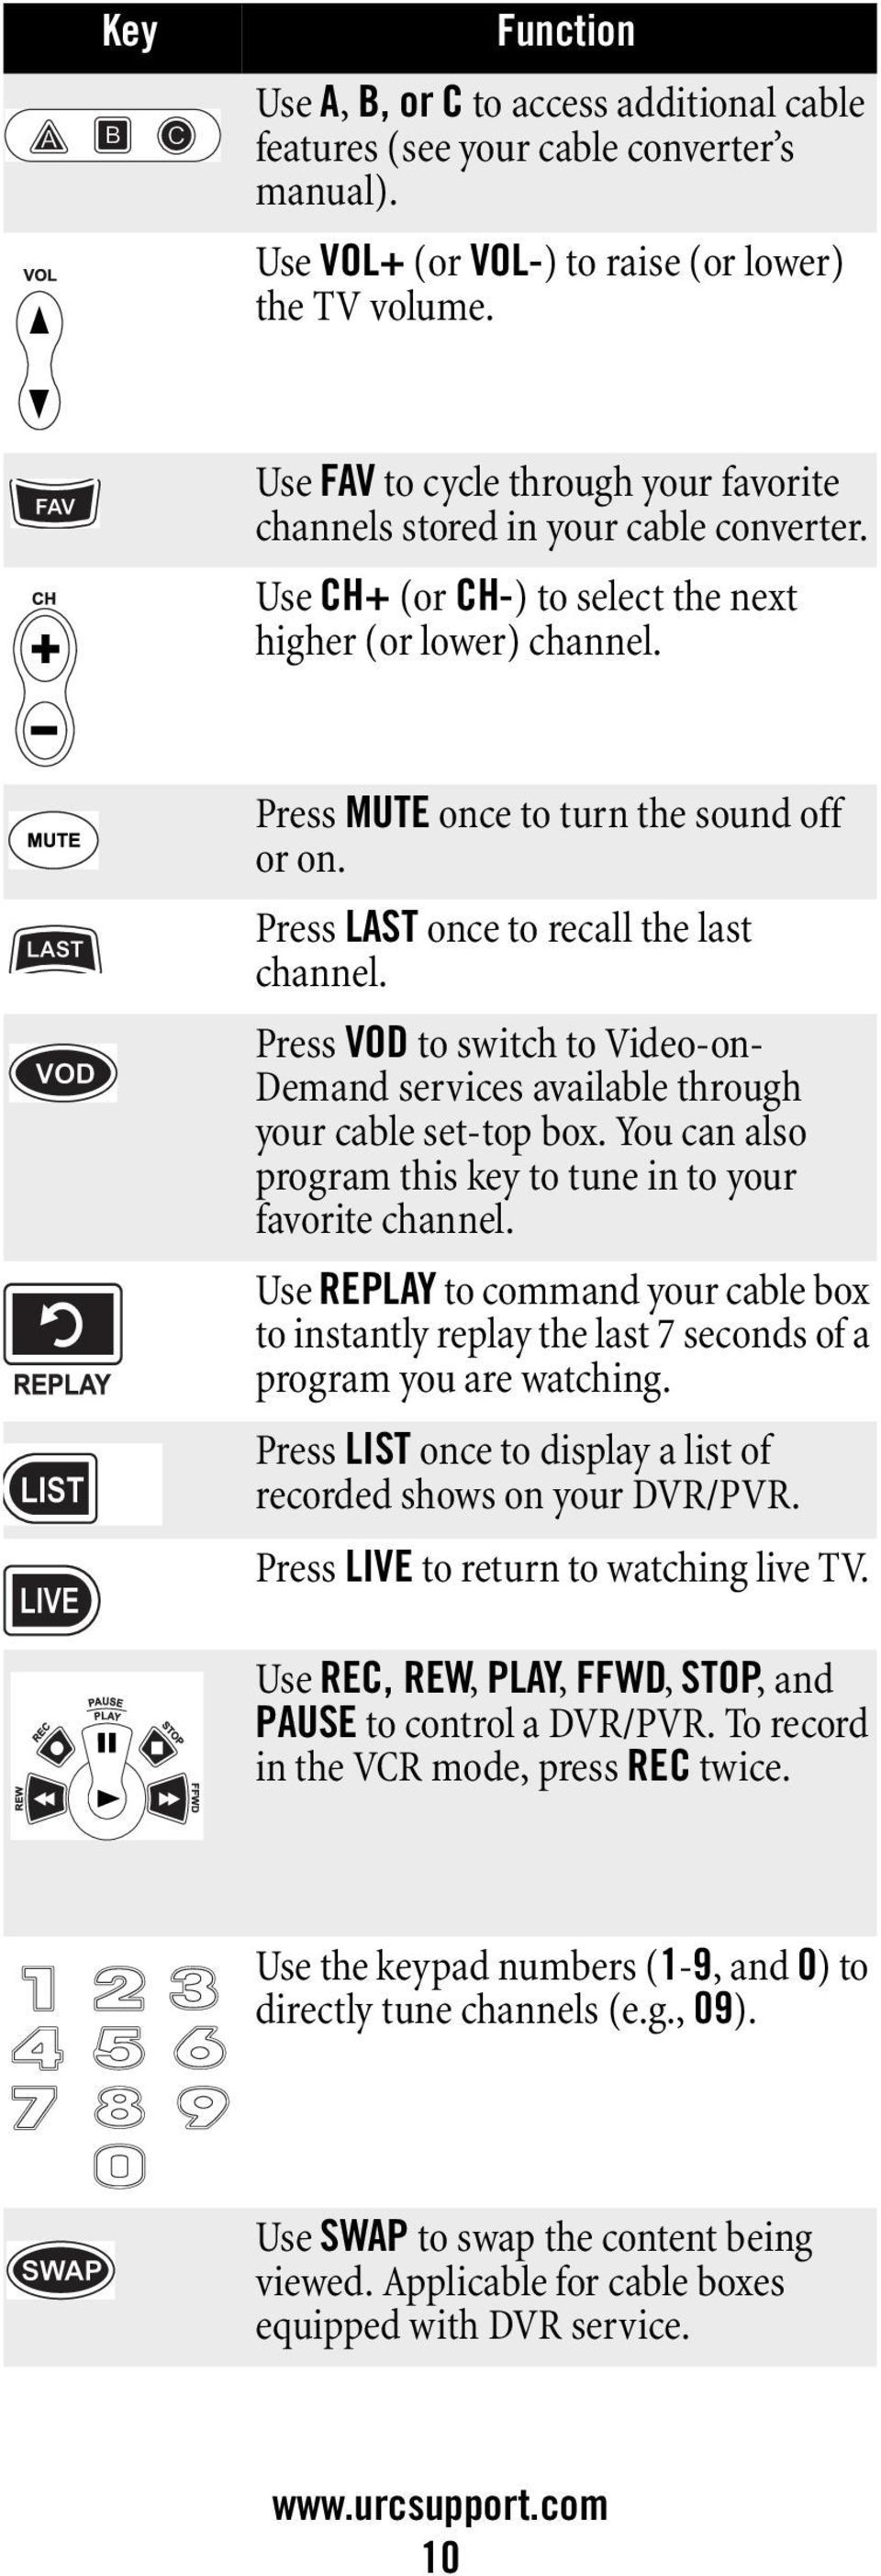 Press LAST once to recall the last channel. Press VOD to switch to Video-on- Demand services available through your cable set-top box.